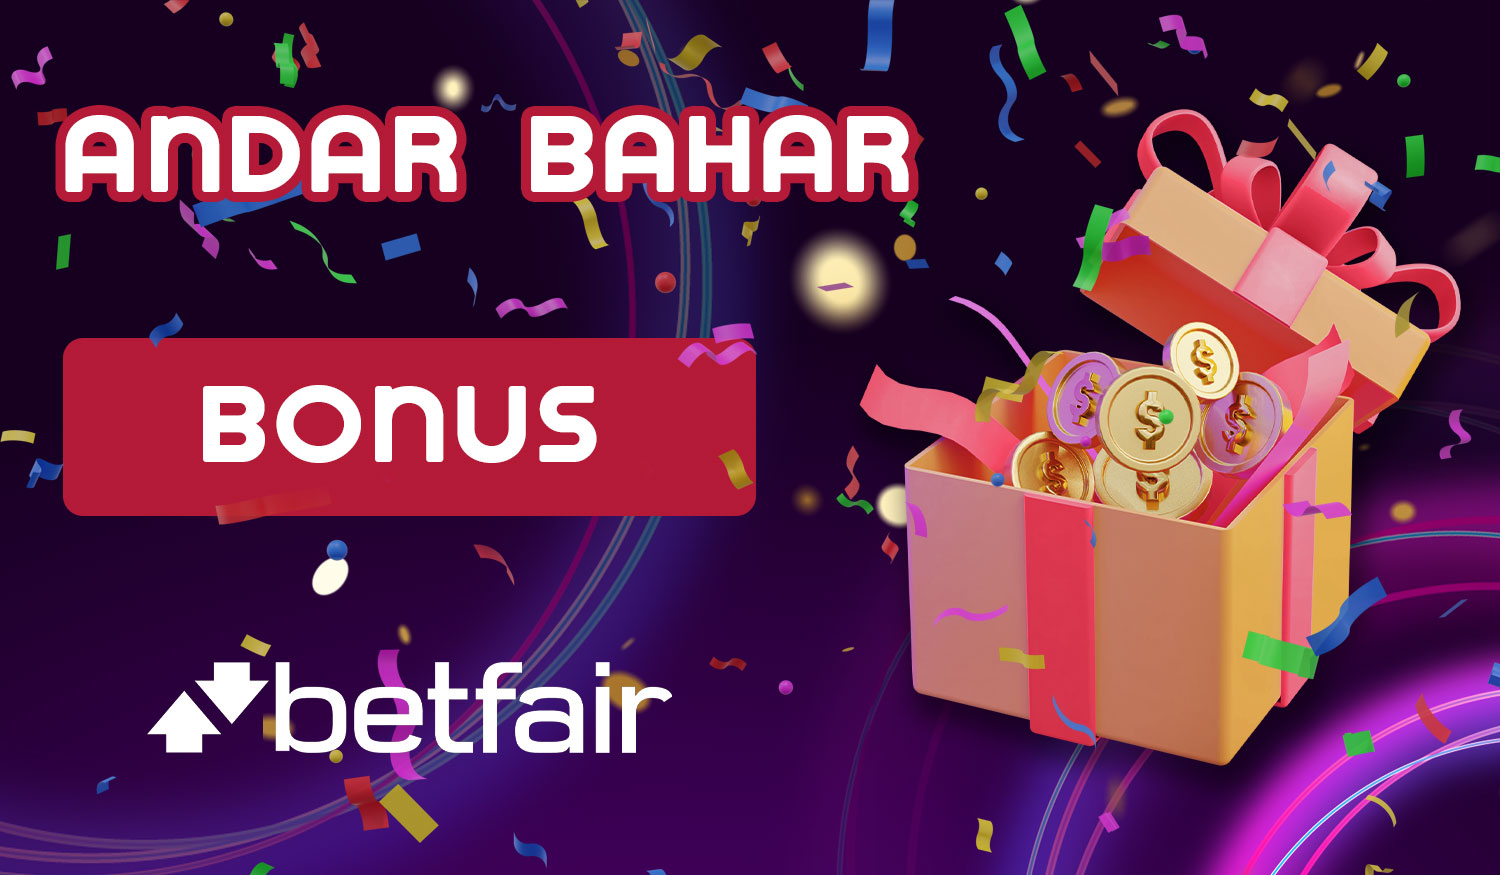 Detailed description of bonuses provided to players from India on the Betfair platform